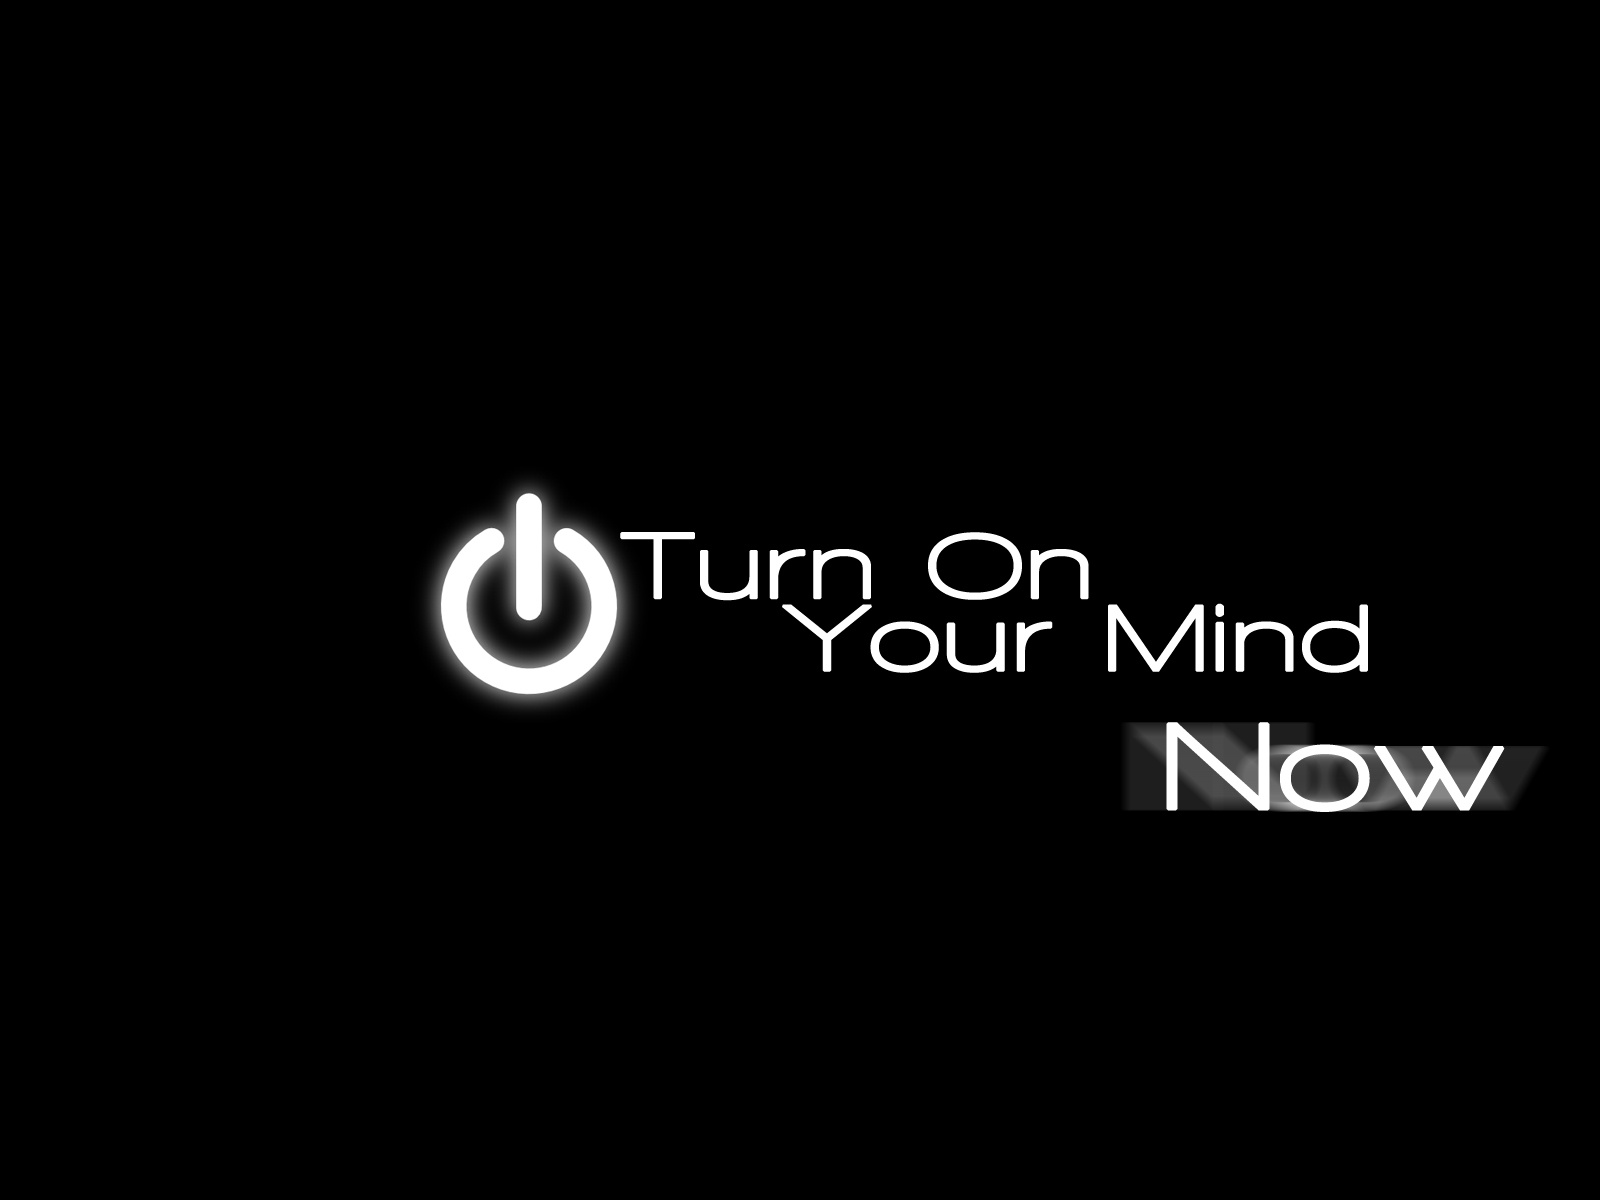 Turn on your mind now by asyamsc on DeviantArt